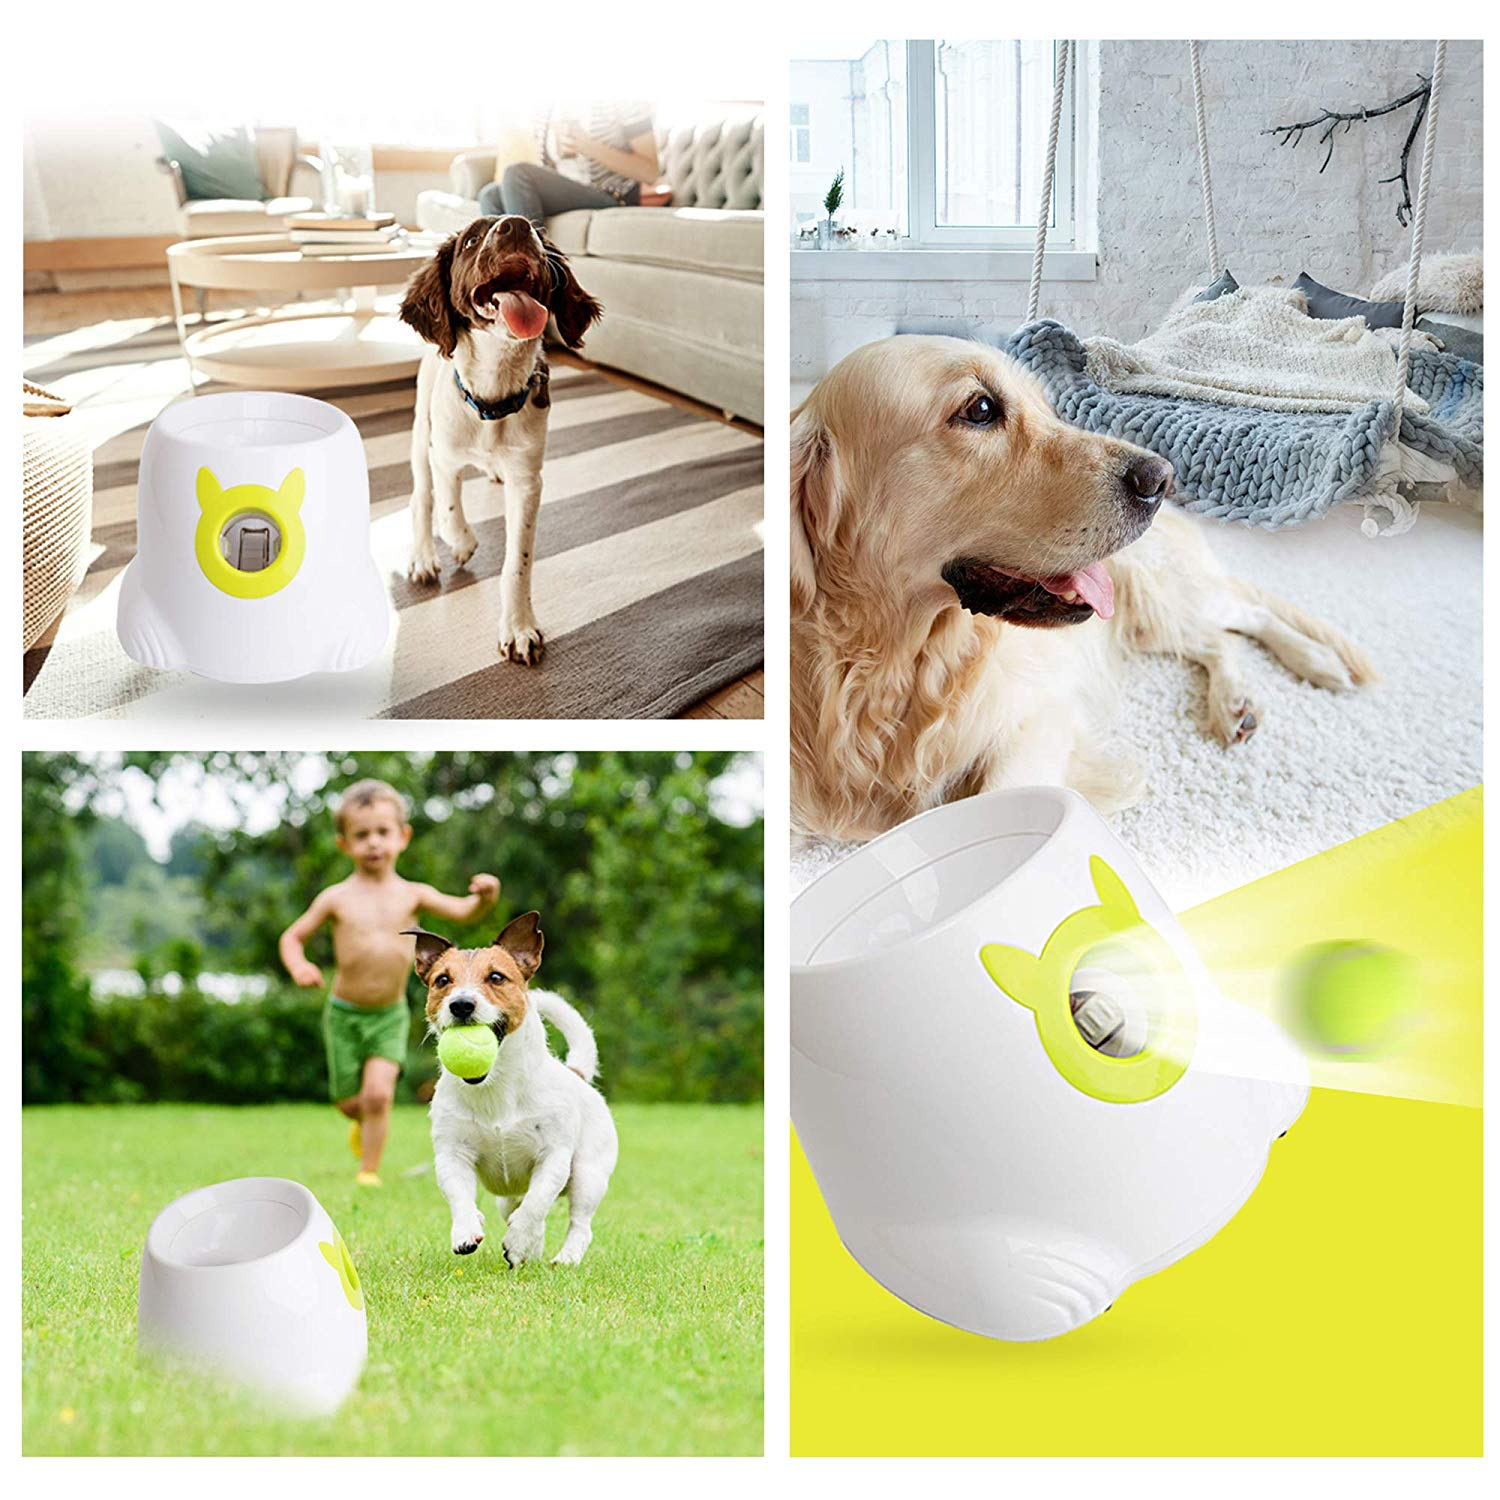 Does your dog have too much energy? Probably not more than a robot.<br><br>Exhaust your pup with an automatic fetch machine available <a href="https://amzn.to/2NOHxnE" target="_blank" "nofollow">here</a>.